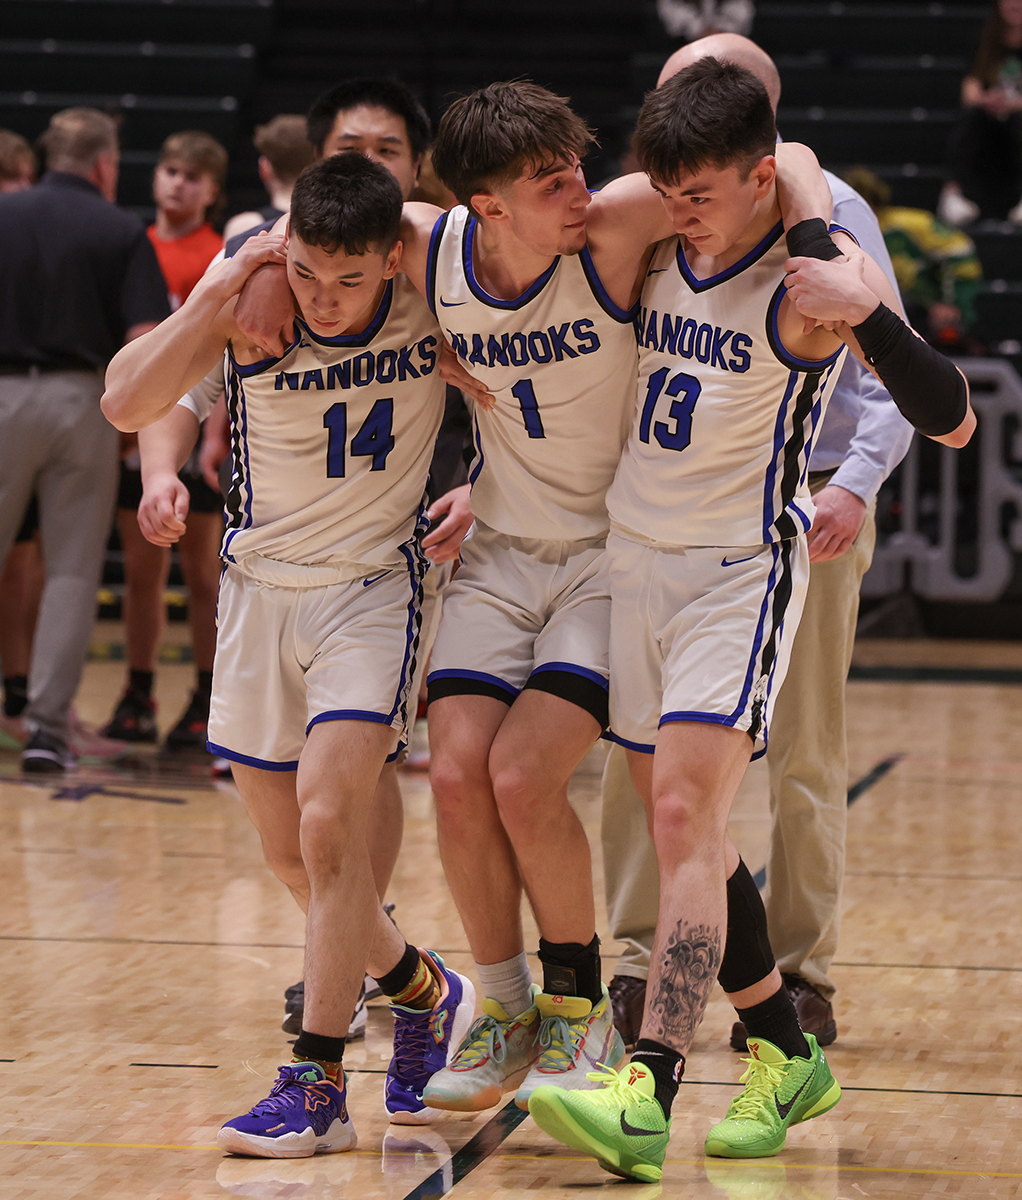 Nanooks Ethan Hannon (No. 14) and Jade Greene (No. 13) assist Finn Gregg (No. 1) off the court late in the game after he developed cramps.